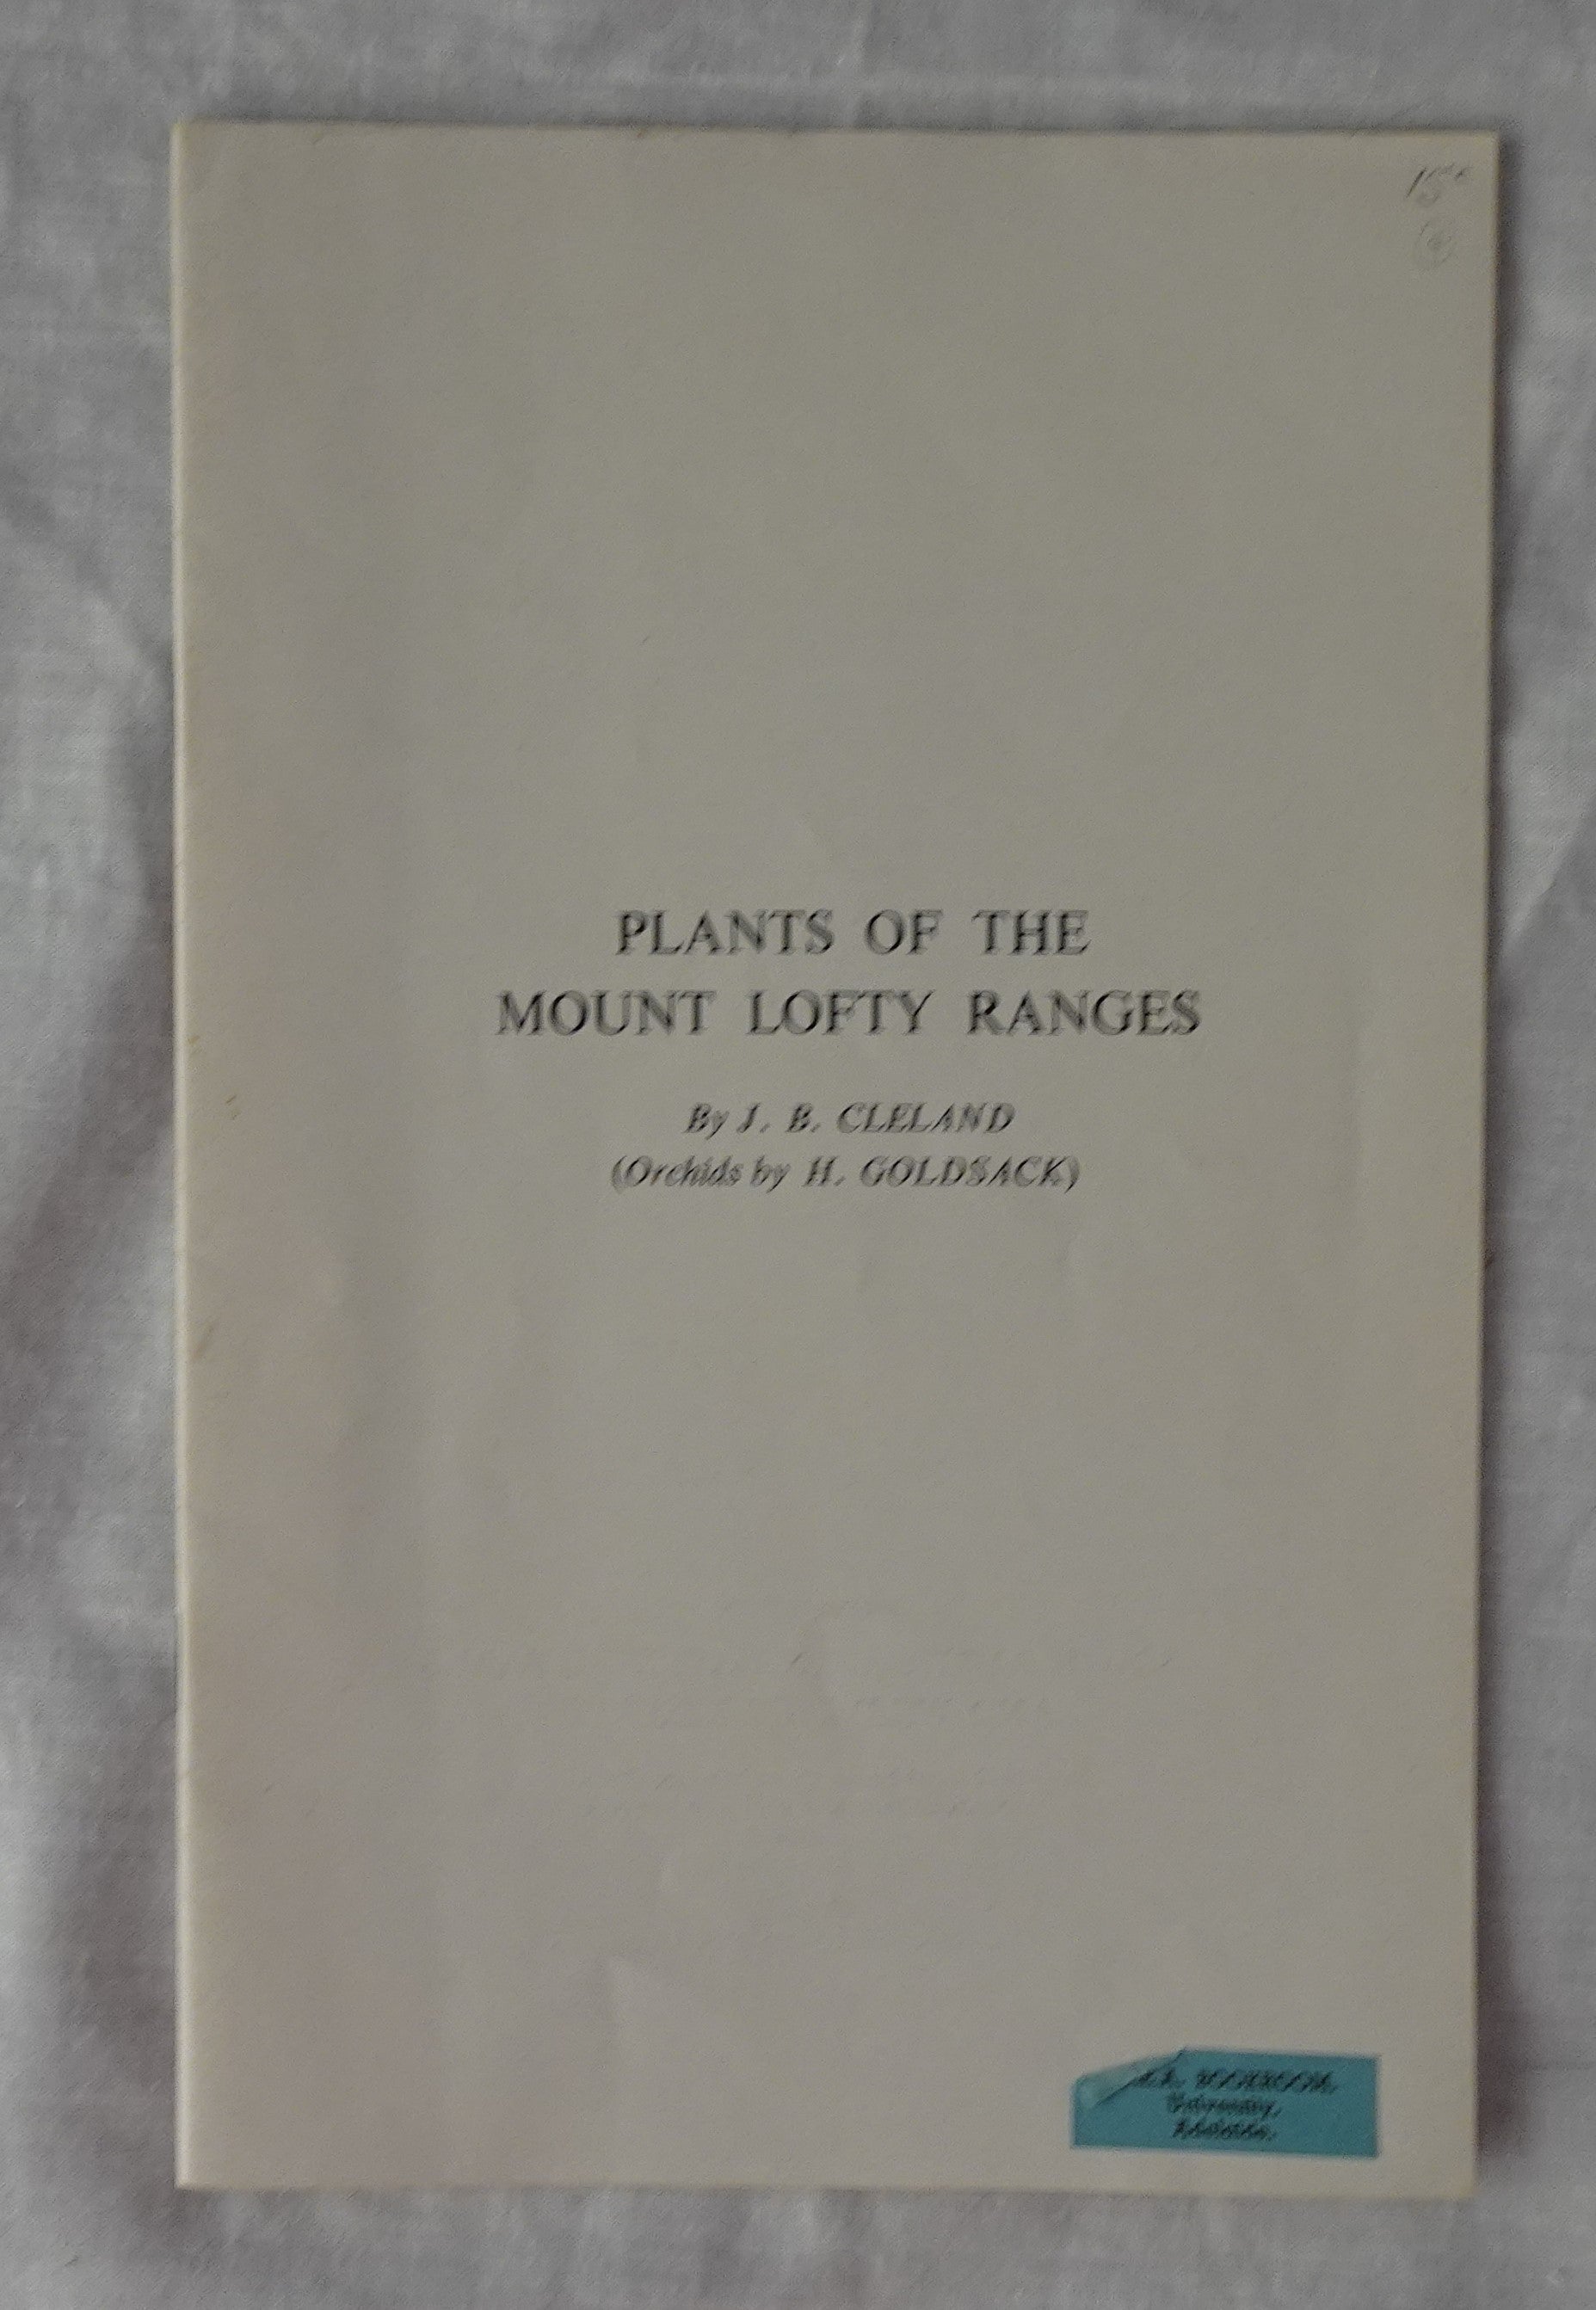 Plants of the Mount Lofty Ranges  by J. B. Cleland  (Orchids by H. Goldsack)  Extract from South Australian National Parks and Wild Life Reserves